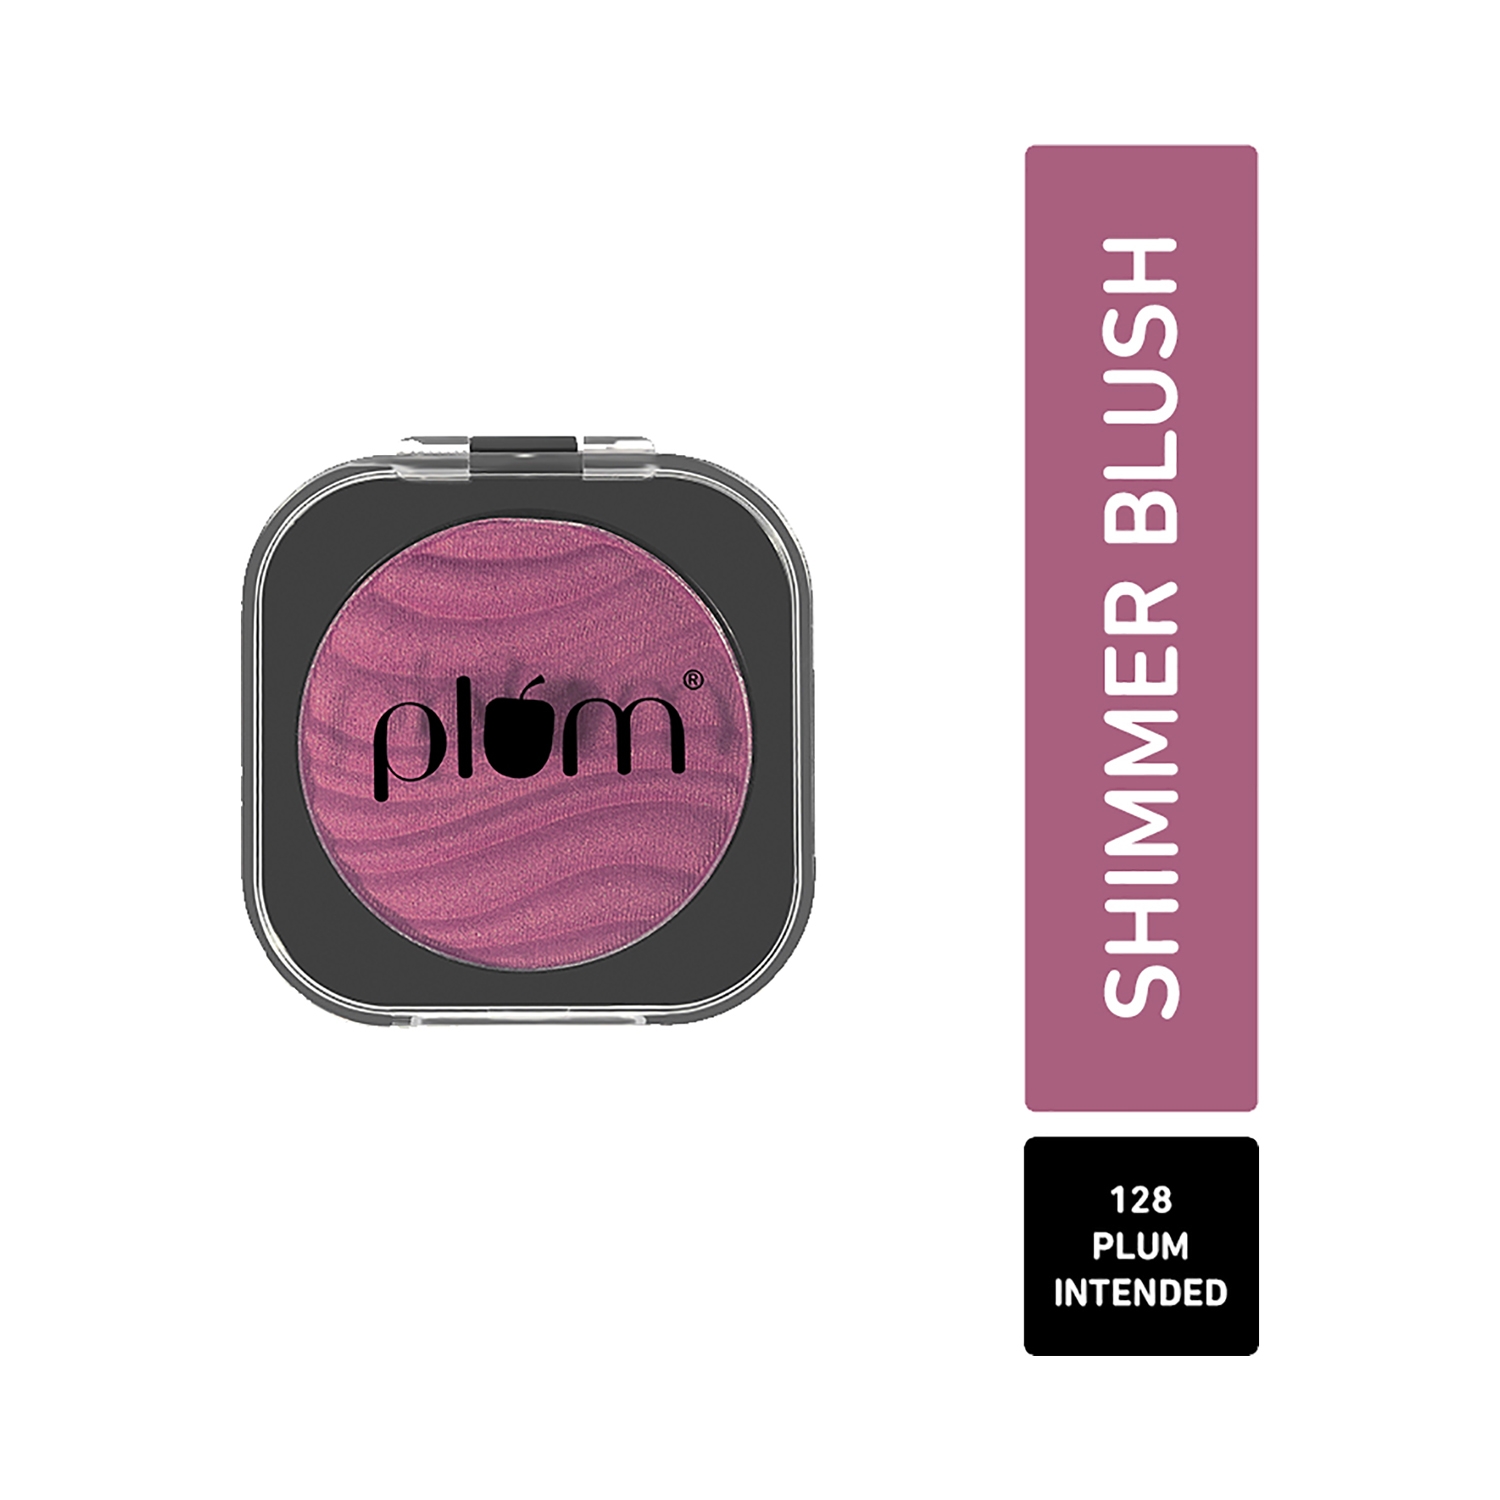 Plum | Plum Cheek-A-Boo Shimmer Blush with Highly Pigmented - 128 Plum Intended (4.5g)